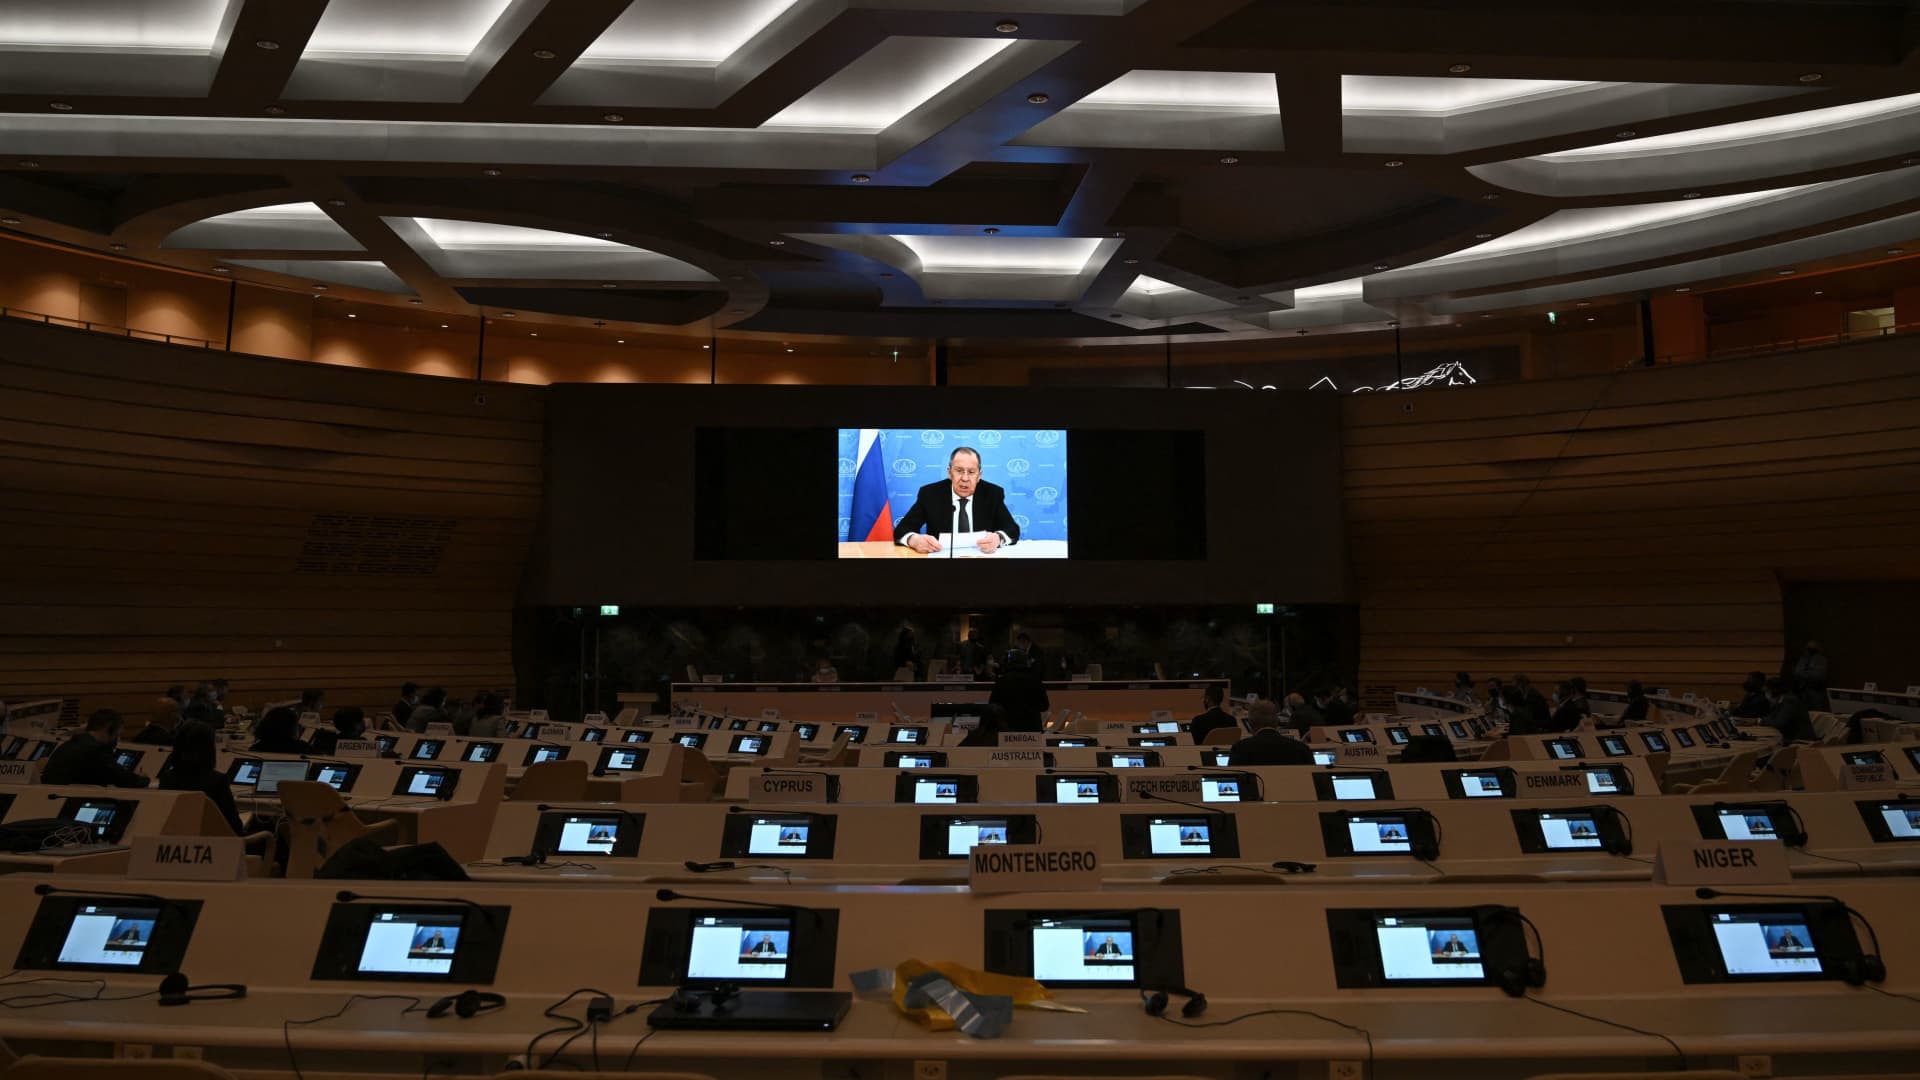 Geneva, March 1, 2022: Ambassadors and diplomats walk out of the U.N. Human Rights Council meeting as Russian Foreign Minister Sergei Lavrov's pre-recorded video message begins to play.